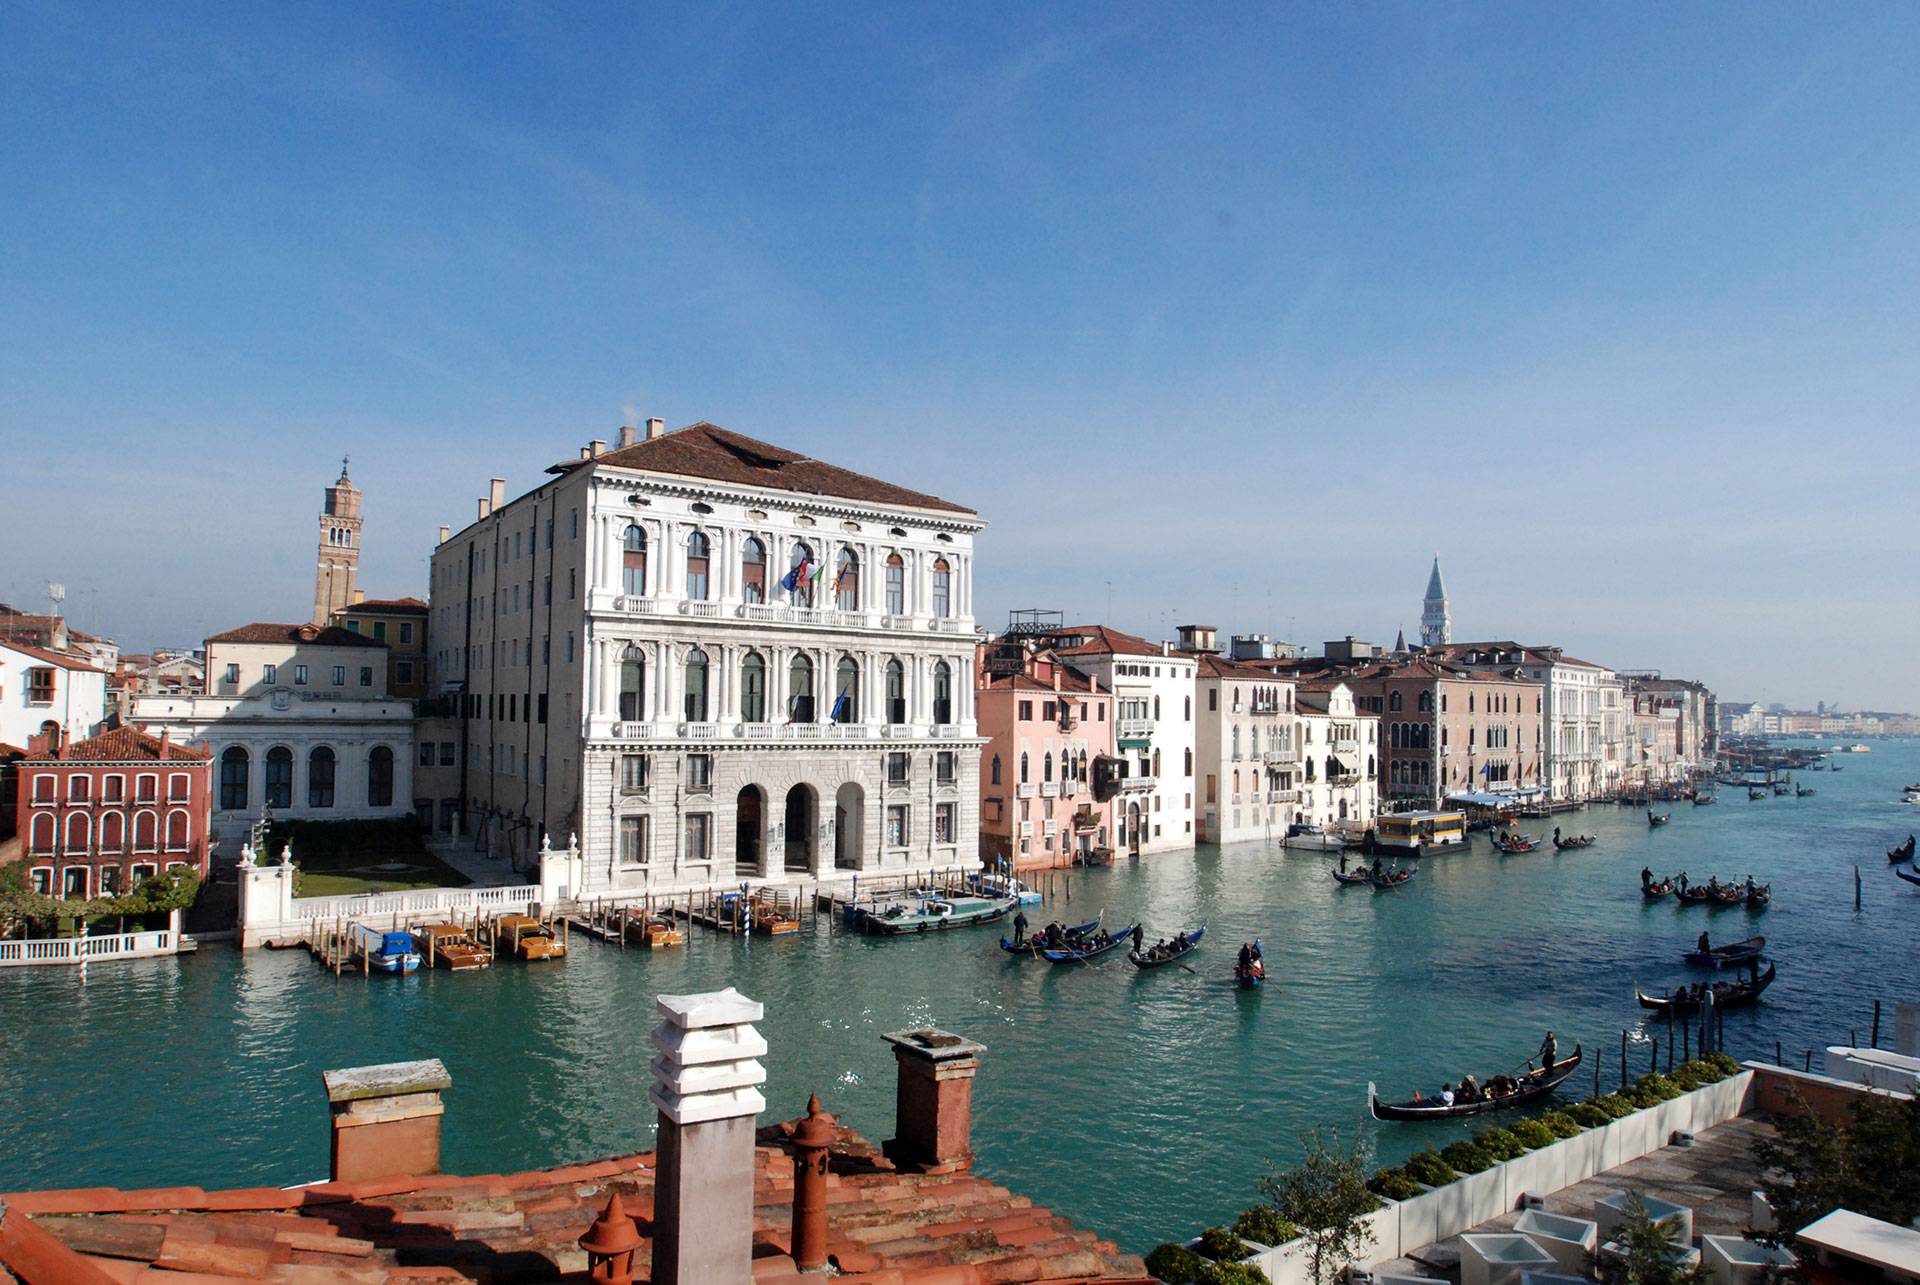 Stunning view from the Guggenheim terrace on the Grand Canal